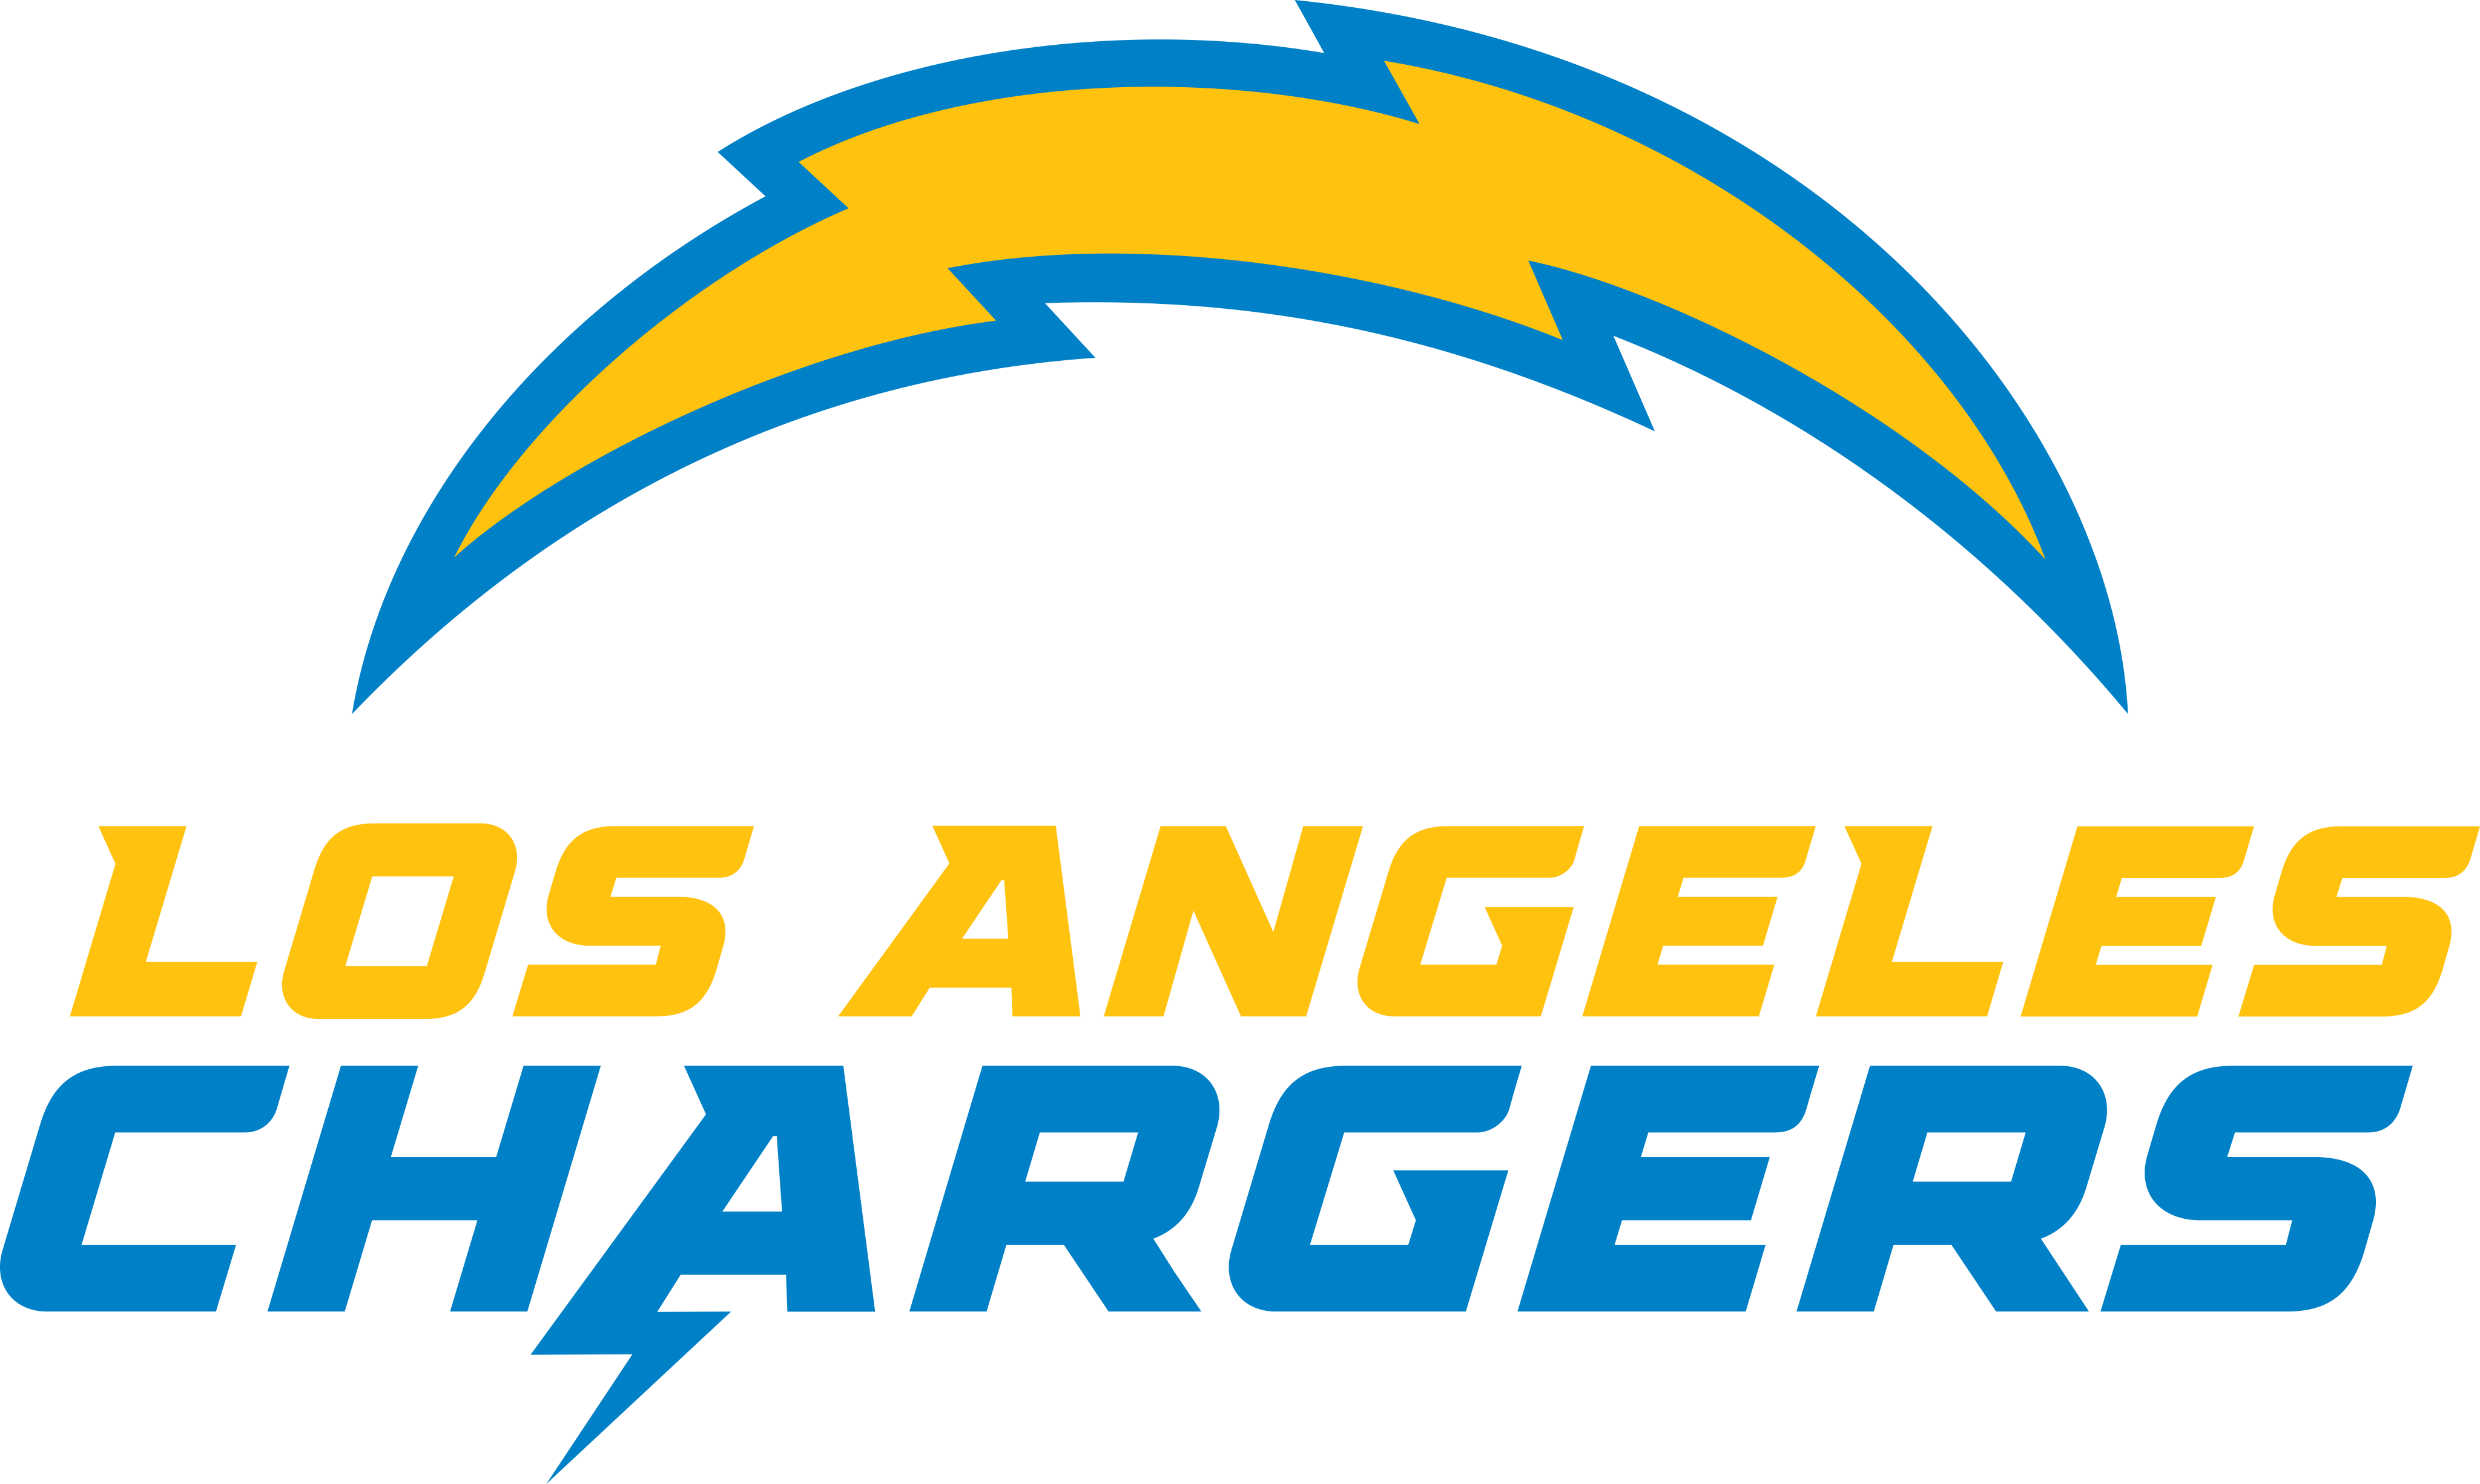 los angeles chargers logo - Los Angeles Chargers Logo